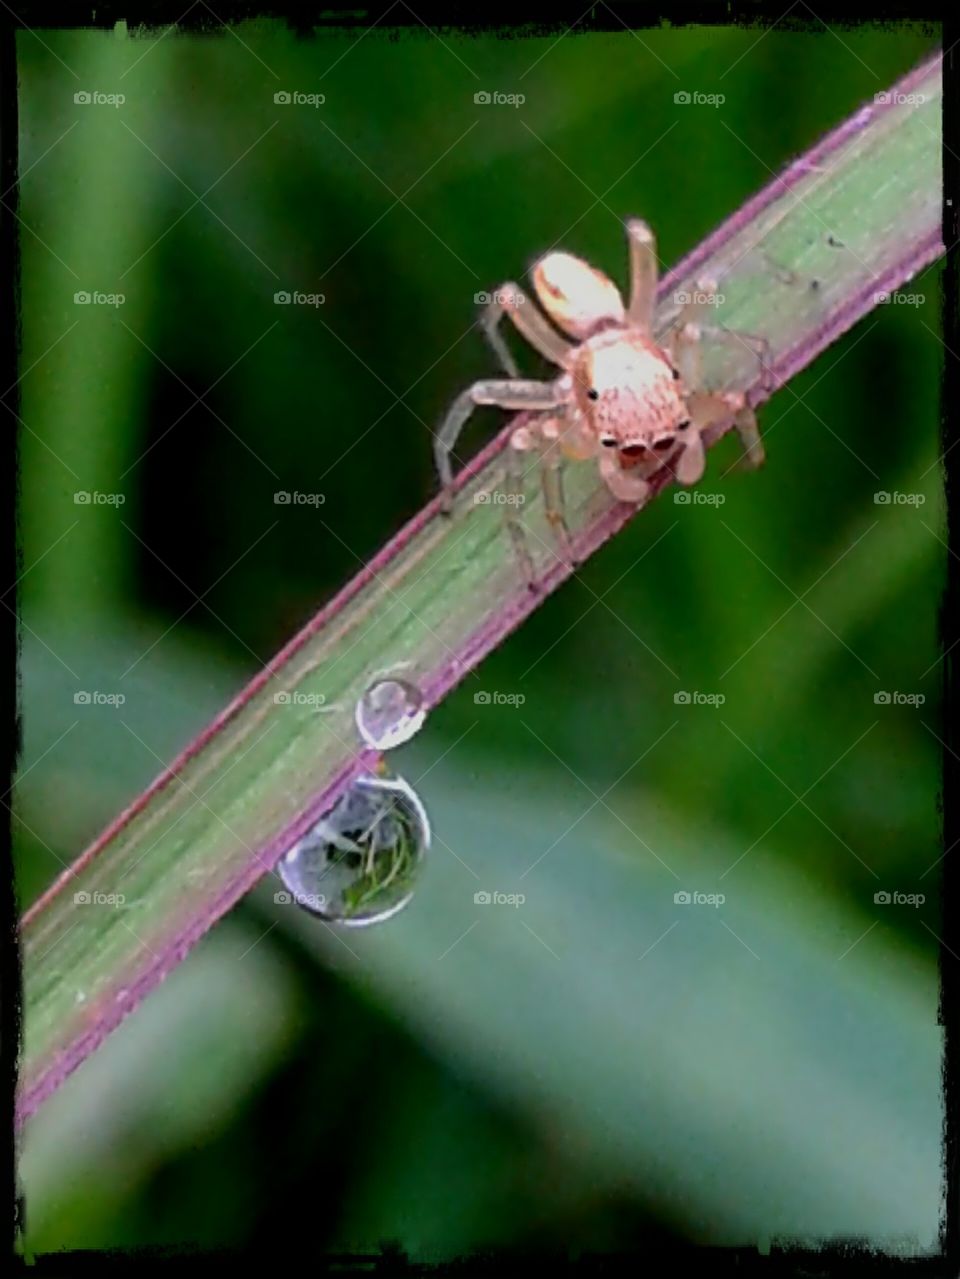 tiny spider on a leaf